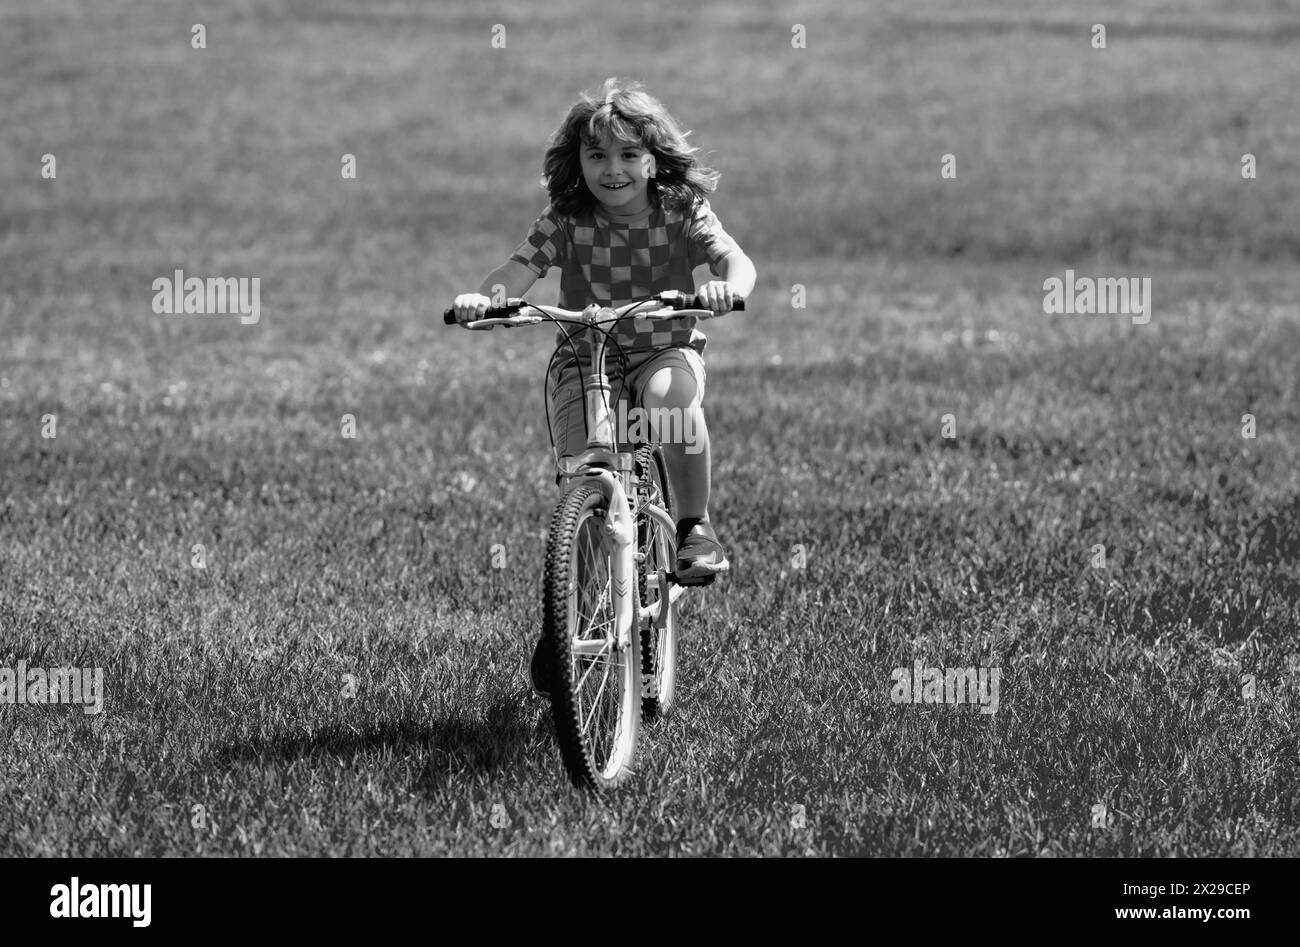 Little kid boy ride a bike in the park. Kid cycling on bicycle. Happy smiling child riding a bike. Boy start to ride a bicycle. Sporty kid bike riding Stock Photo